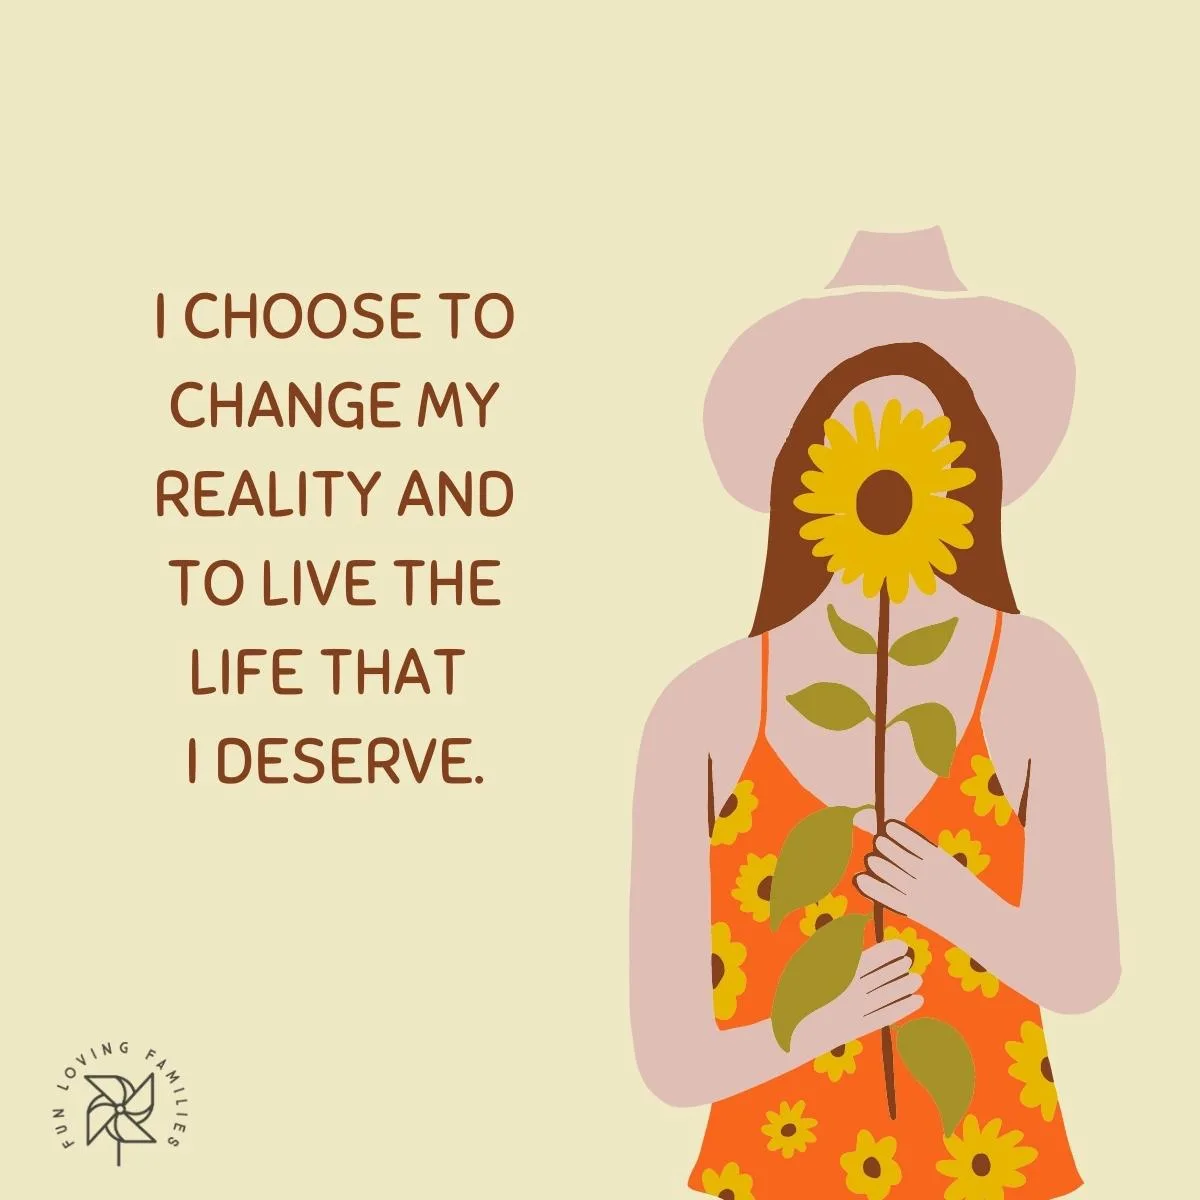 I choose to change my reality and to live the life that I deserve